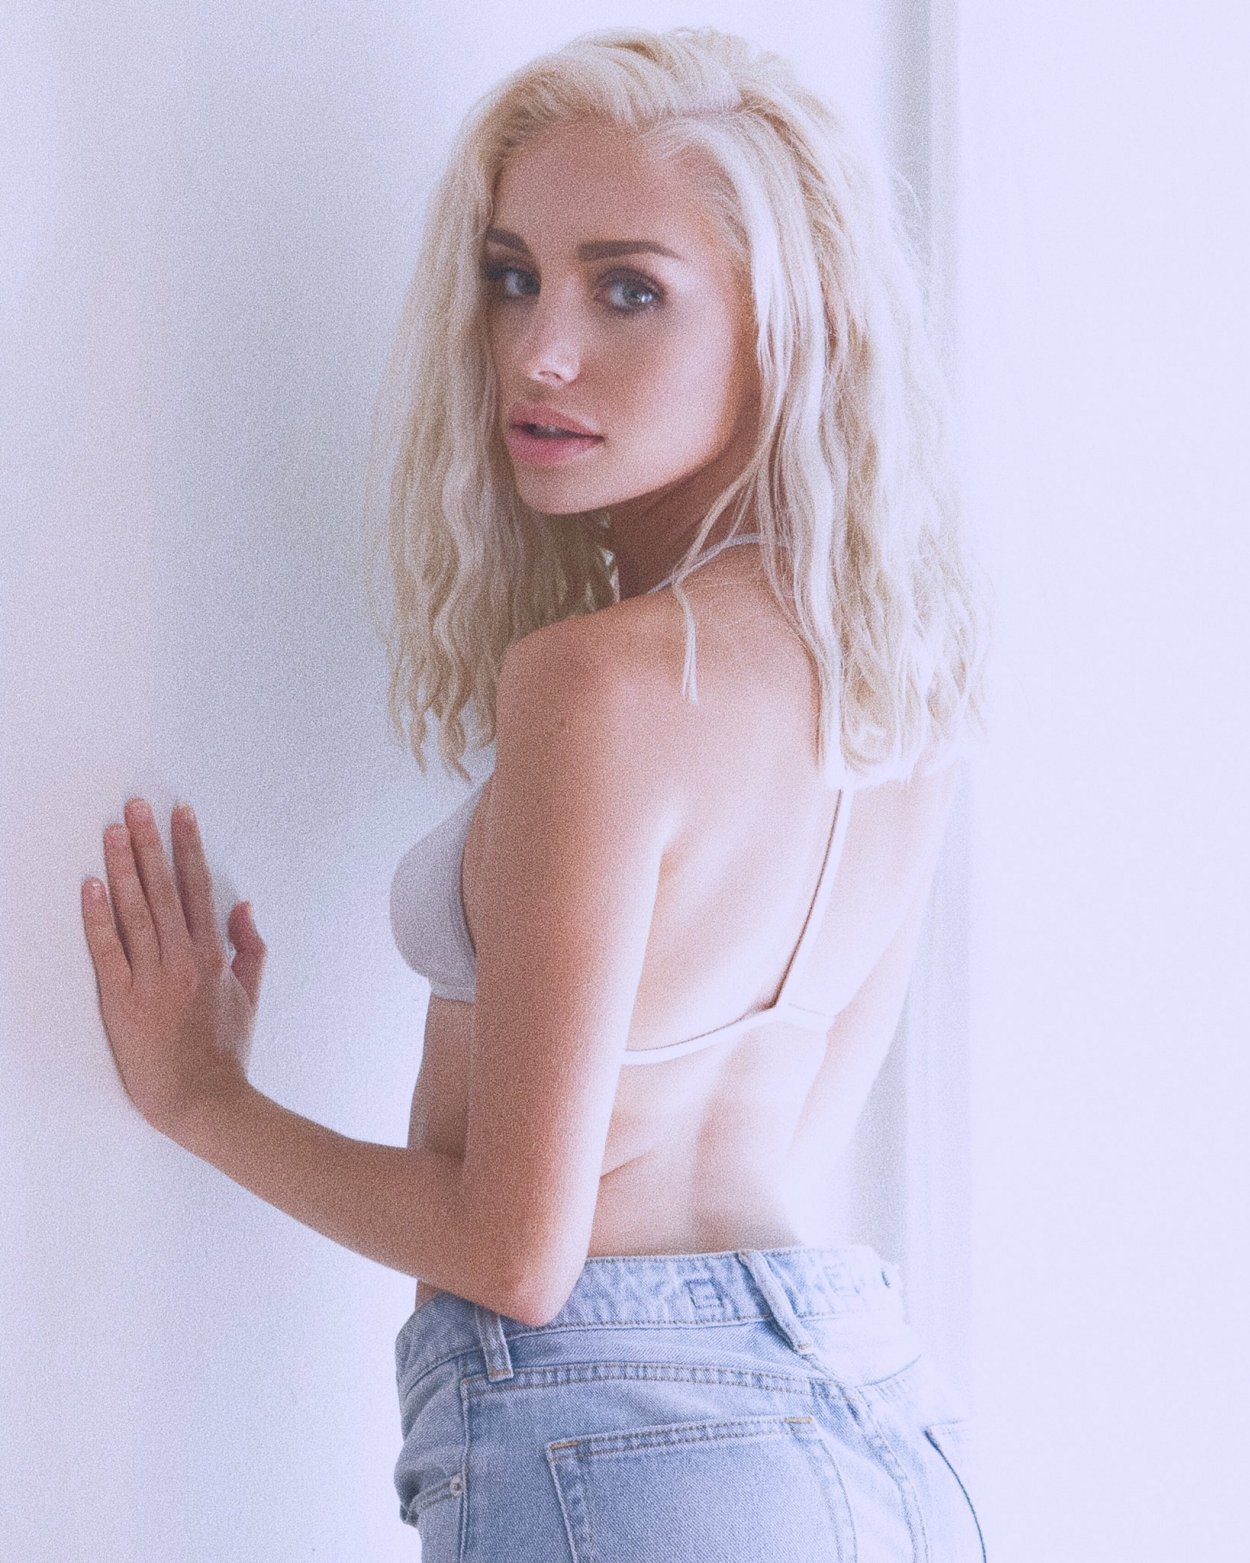 Naomi woods onlyfans.